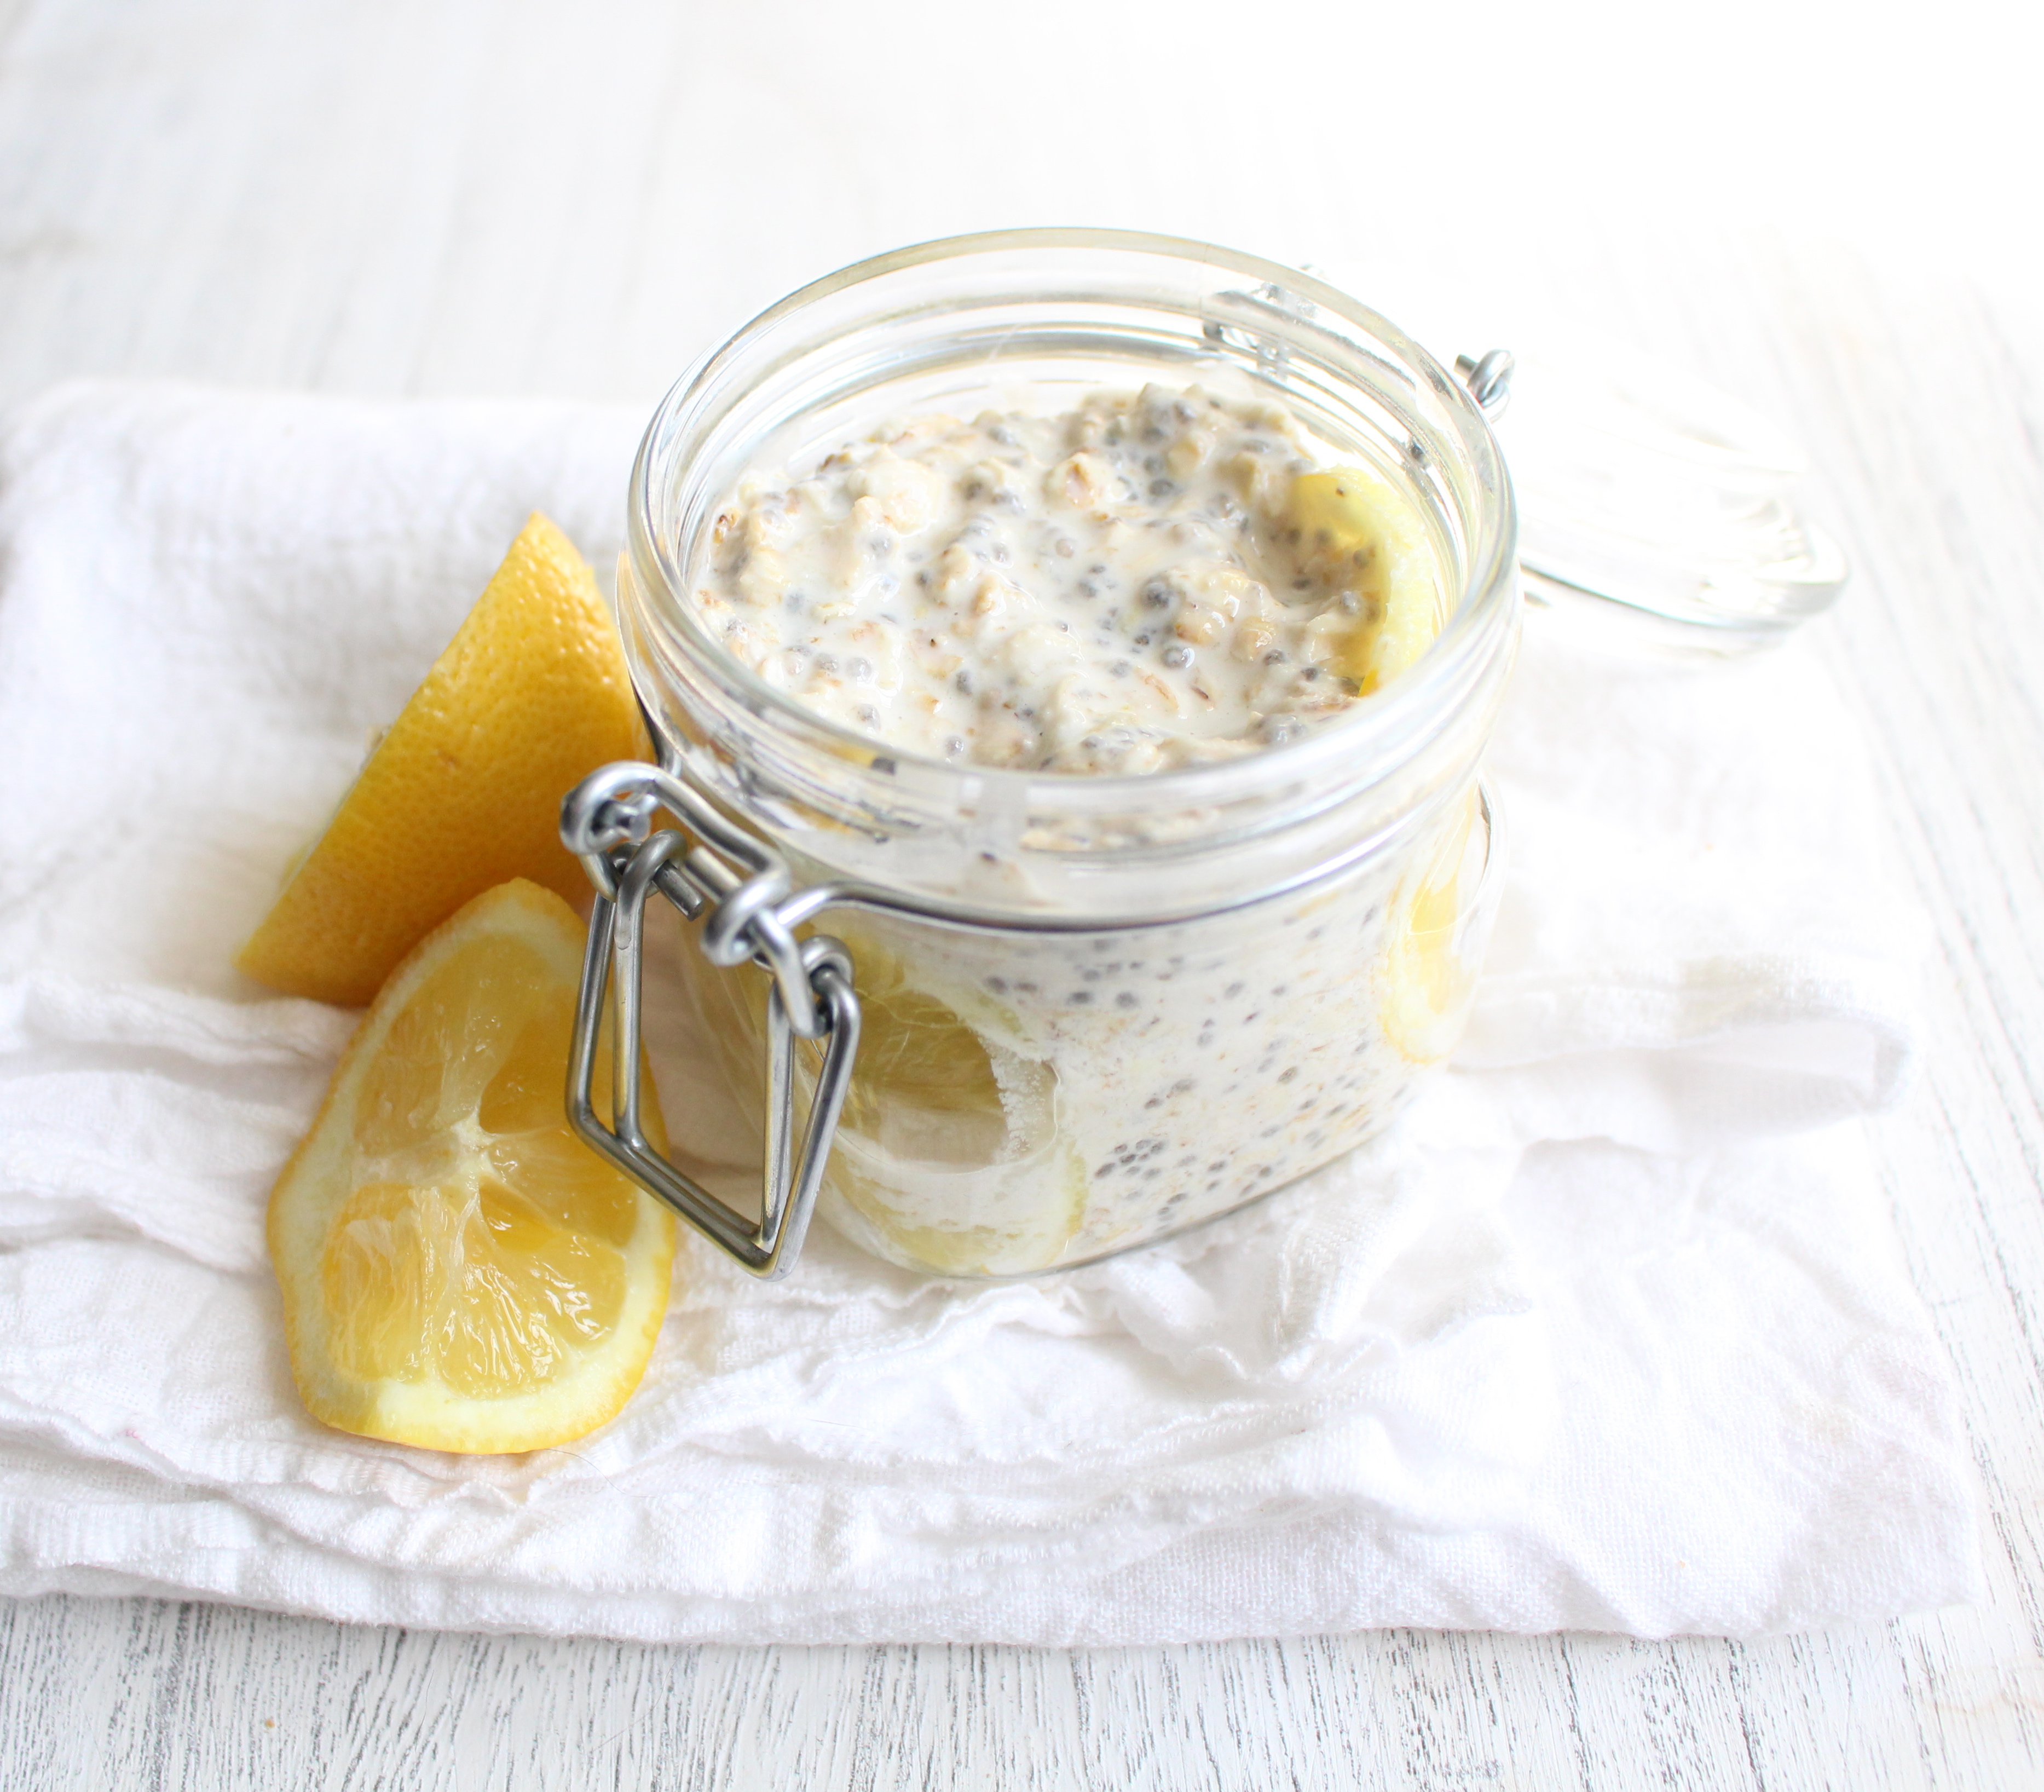 Lemon "Poppy" Overnight Oats - just like your favorite muffin! A healthy breakfast you can throw together in less than 5 minutes the night before and grab and go in the AM!